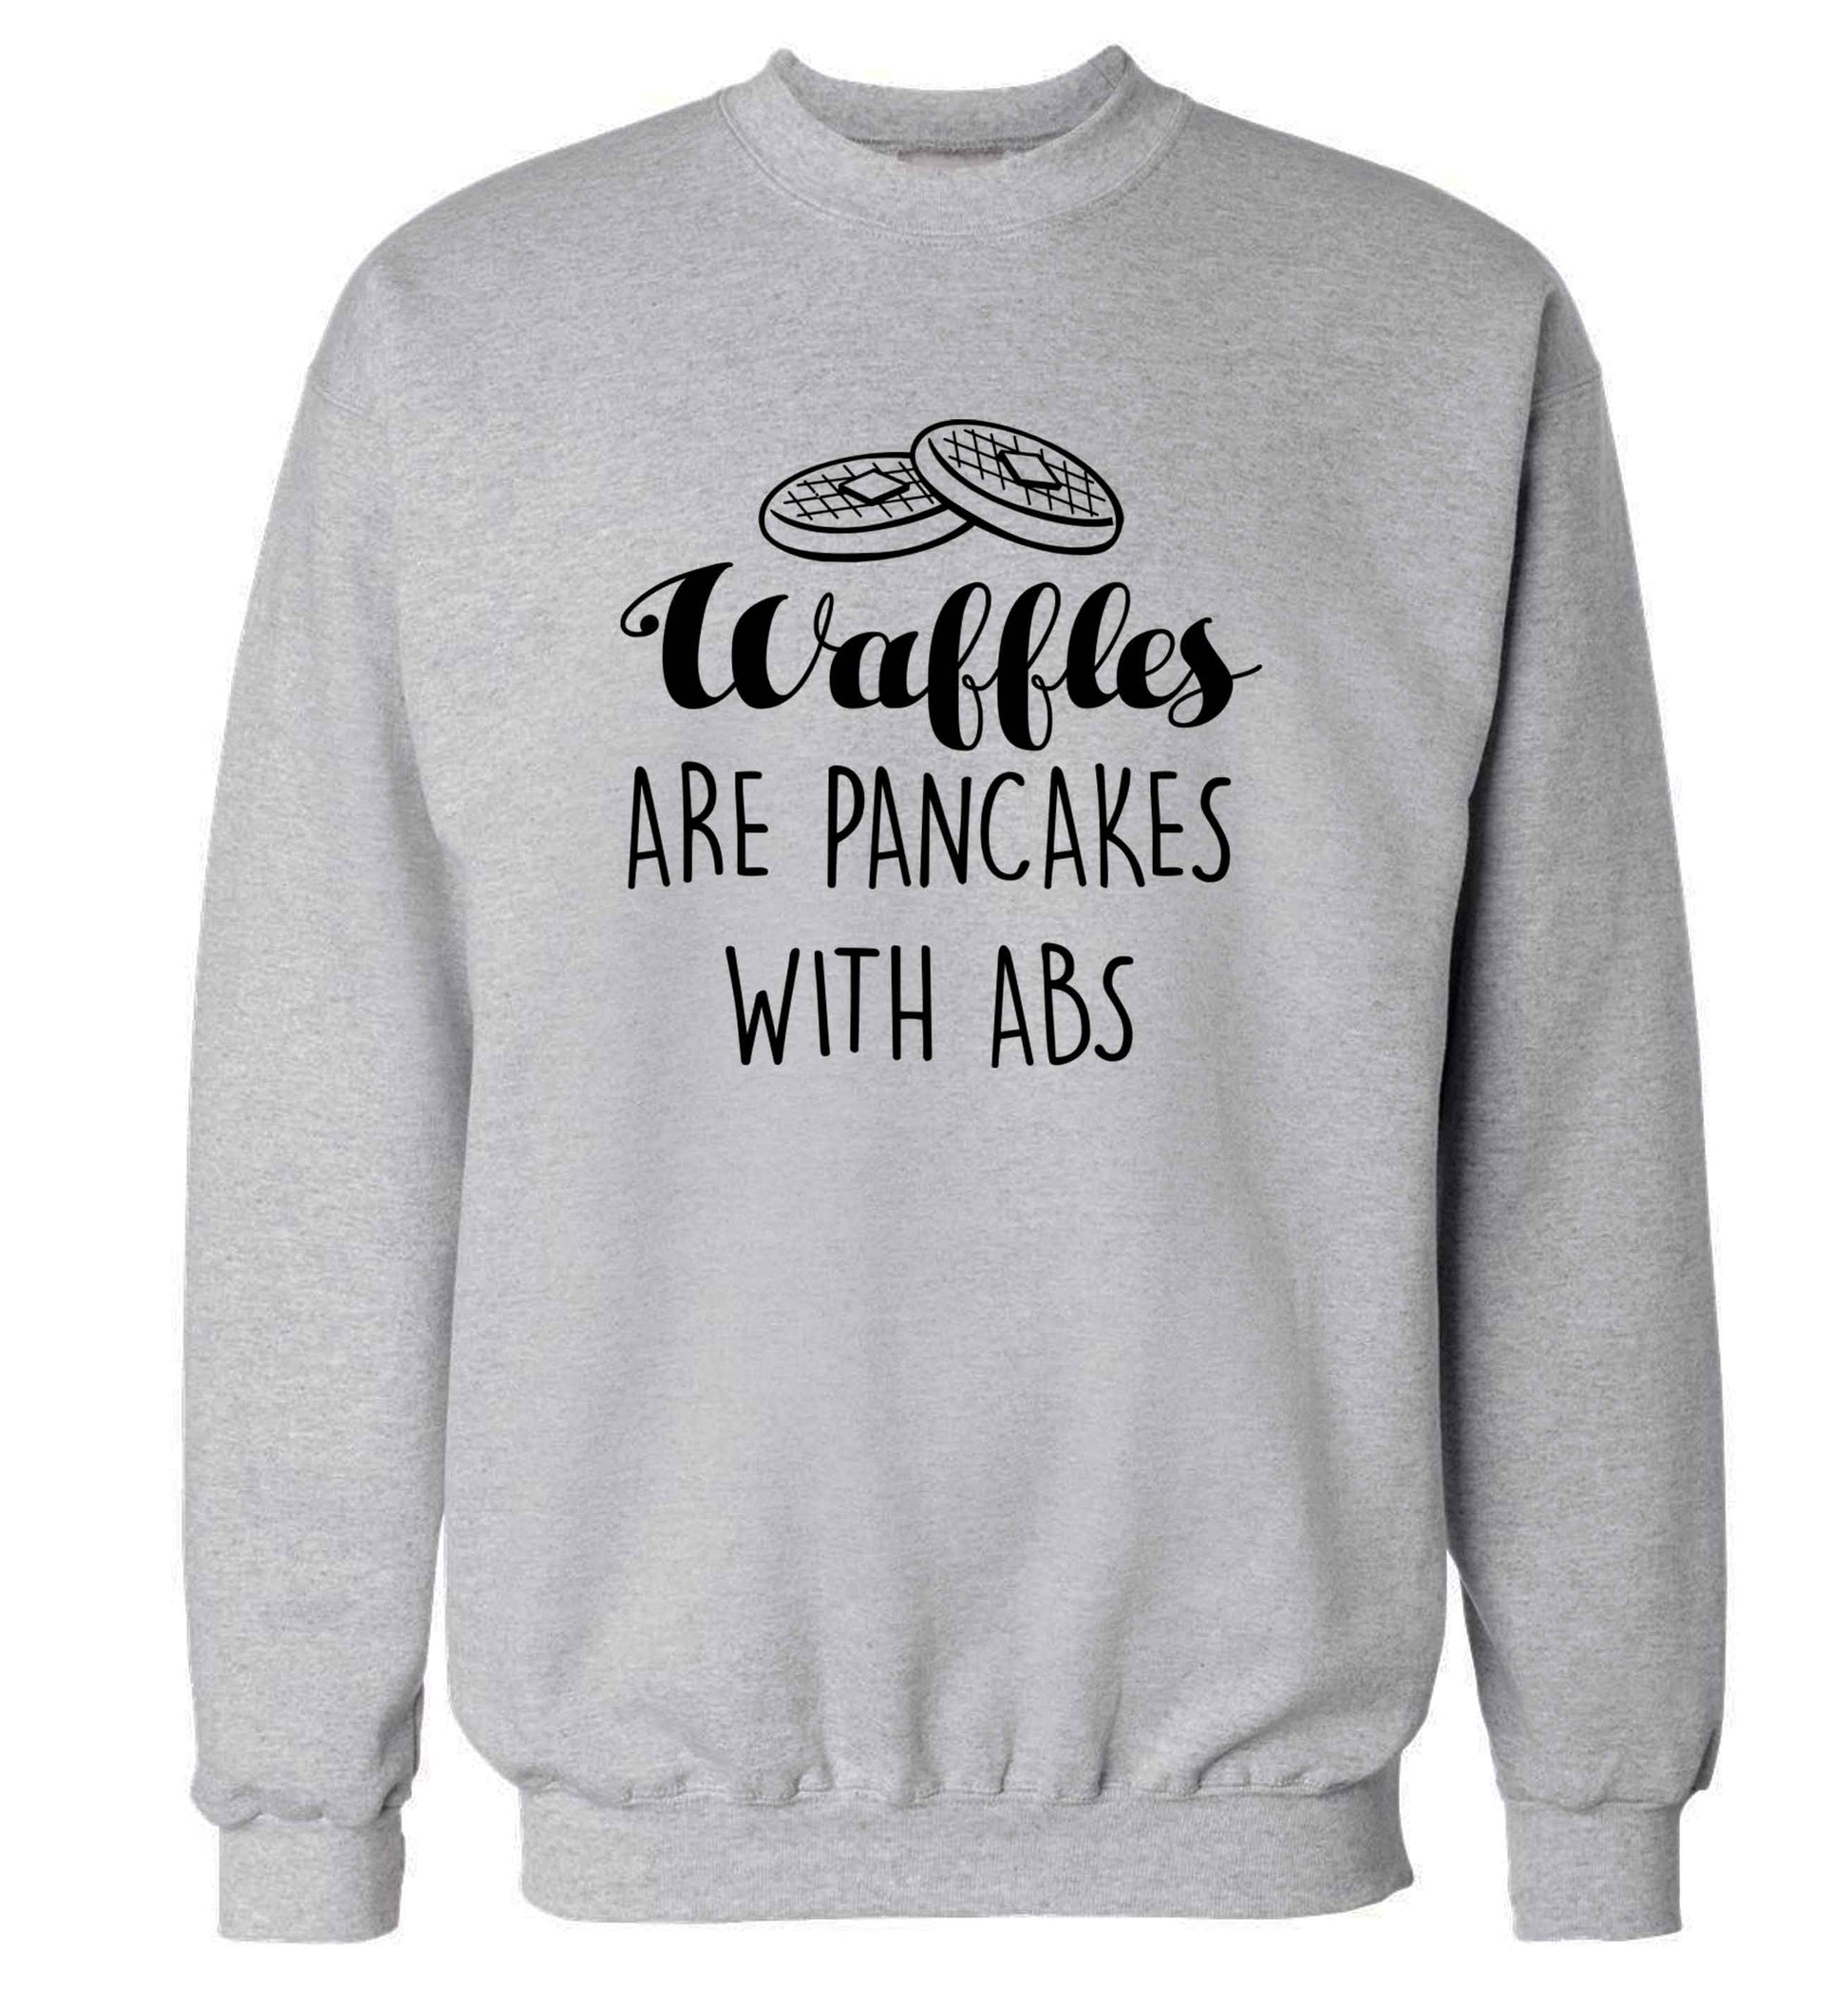 Waffles are just pancakes with abs adult's unisex grey sweater 2XL